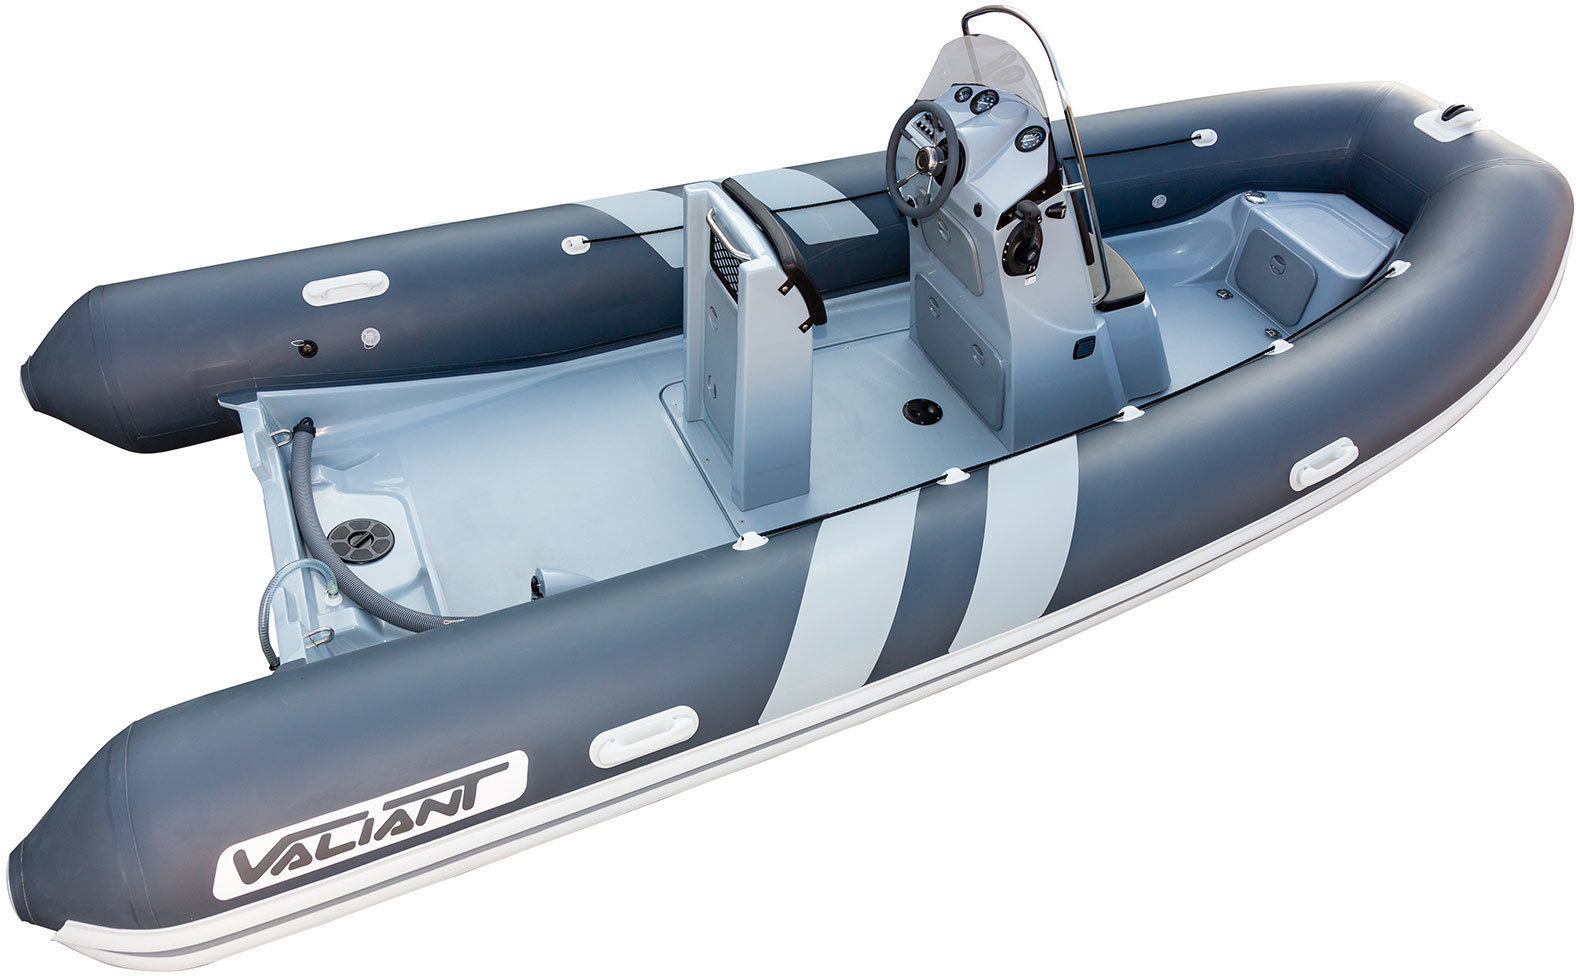 Inflatable Boat Valiant Inflatable Boat Sport Hypalon 550 cm Dark Grey